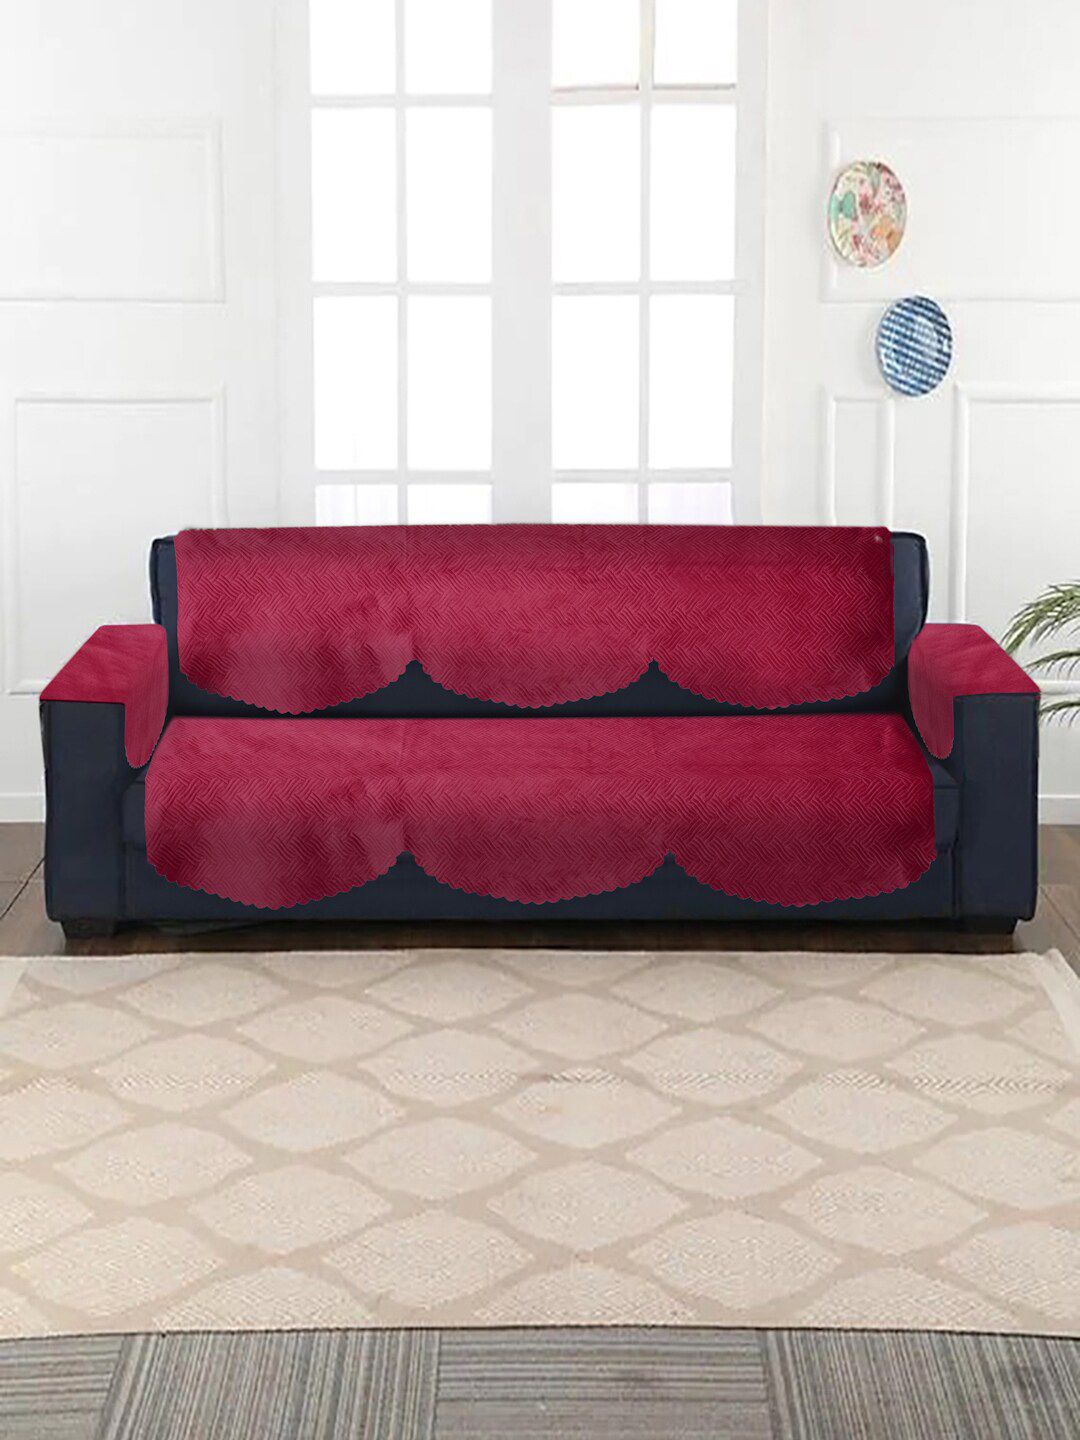 HOSTA HOMES Set of 16 Maroon Self Design 5 Seater Sofa Covers Price in India